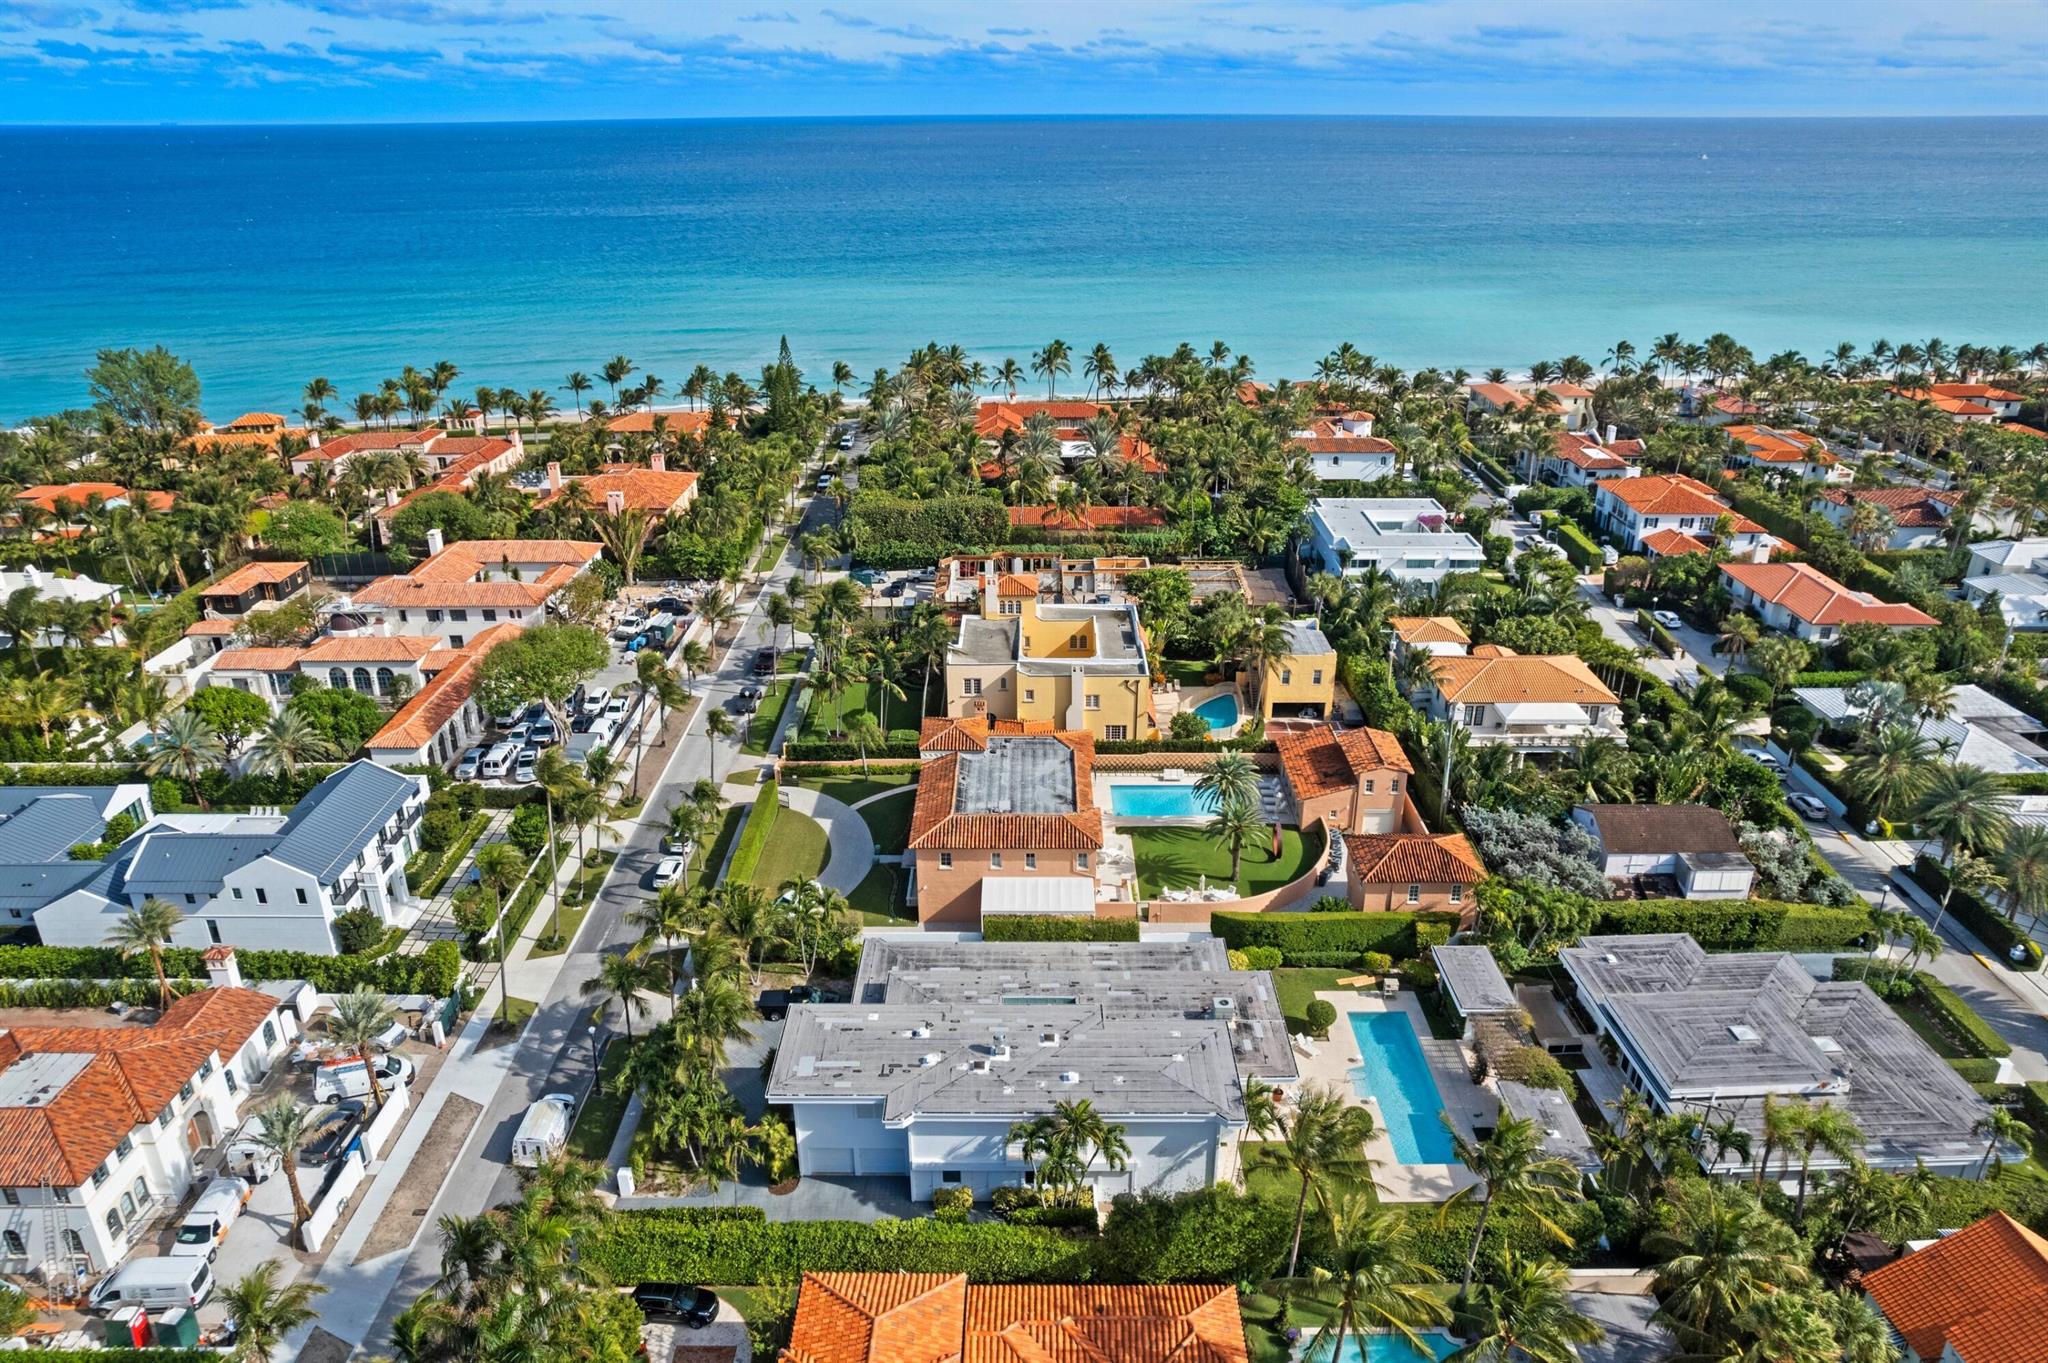 This rare midtown compound, encompassing 150 Dunbar Rd. and 151 Atlantic Ave., boasts two private residences designed by Gene Lawrence, famed for The Esplanade, Neiman Marcus, Cafe L'Europe, and other Palm Beach establishments. It includes a total of 9 bedrooms across over 11,200 SF total space. A spacious backyard, featuring a heated lap pool with cabana bath and storage, separates the two homes. The 29,600+ SF lot extends from Dunbar Rd. to Atlantic Ave., presenting an exceptional opportunity for buyers to either renovate or build new.The primary residence, a two-story structure encompassing 5,732 SF under air, is designed around an atrium and offers 5 bedrooms (including an upstairs apartment with lounge and kitchenette), several living spaces, a formal dining room, a kitchen with an adjacent butler's pantry, a 2-car garage, and space for an elevator installation. The single-story guest house, spreading over 3,127 SF under air, is complete with 4 bedrooms, various living areas, a kitchen, a 2-car garage, and all essentials for both full-time and seasonal living. Each home in the compound has its own entrance, enhancing privacy and versatility. Located just a short distance from the beach, this property is also conveniently near all the dining, shopping, and entertainment options Palm Beach has to offer.